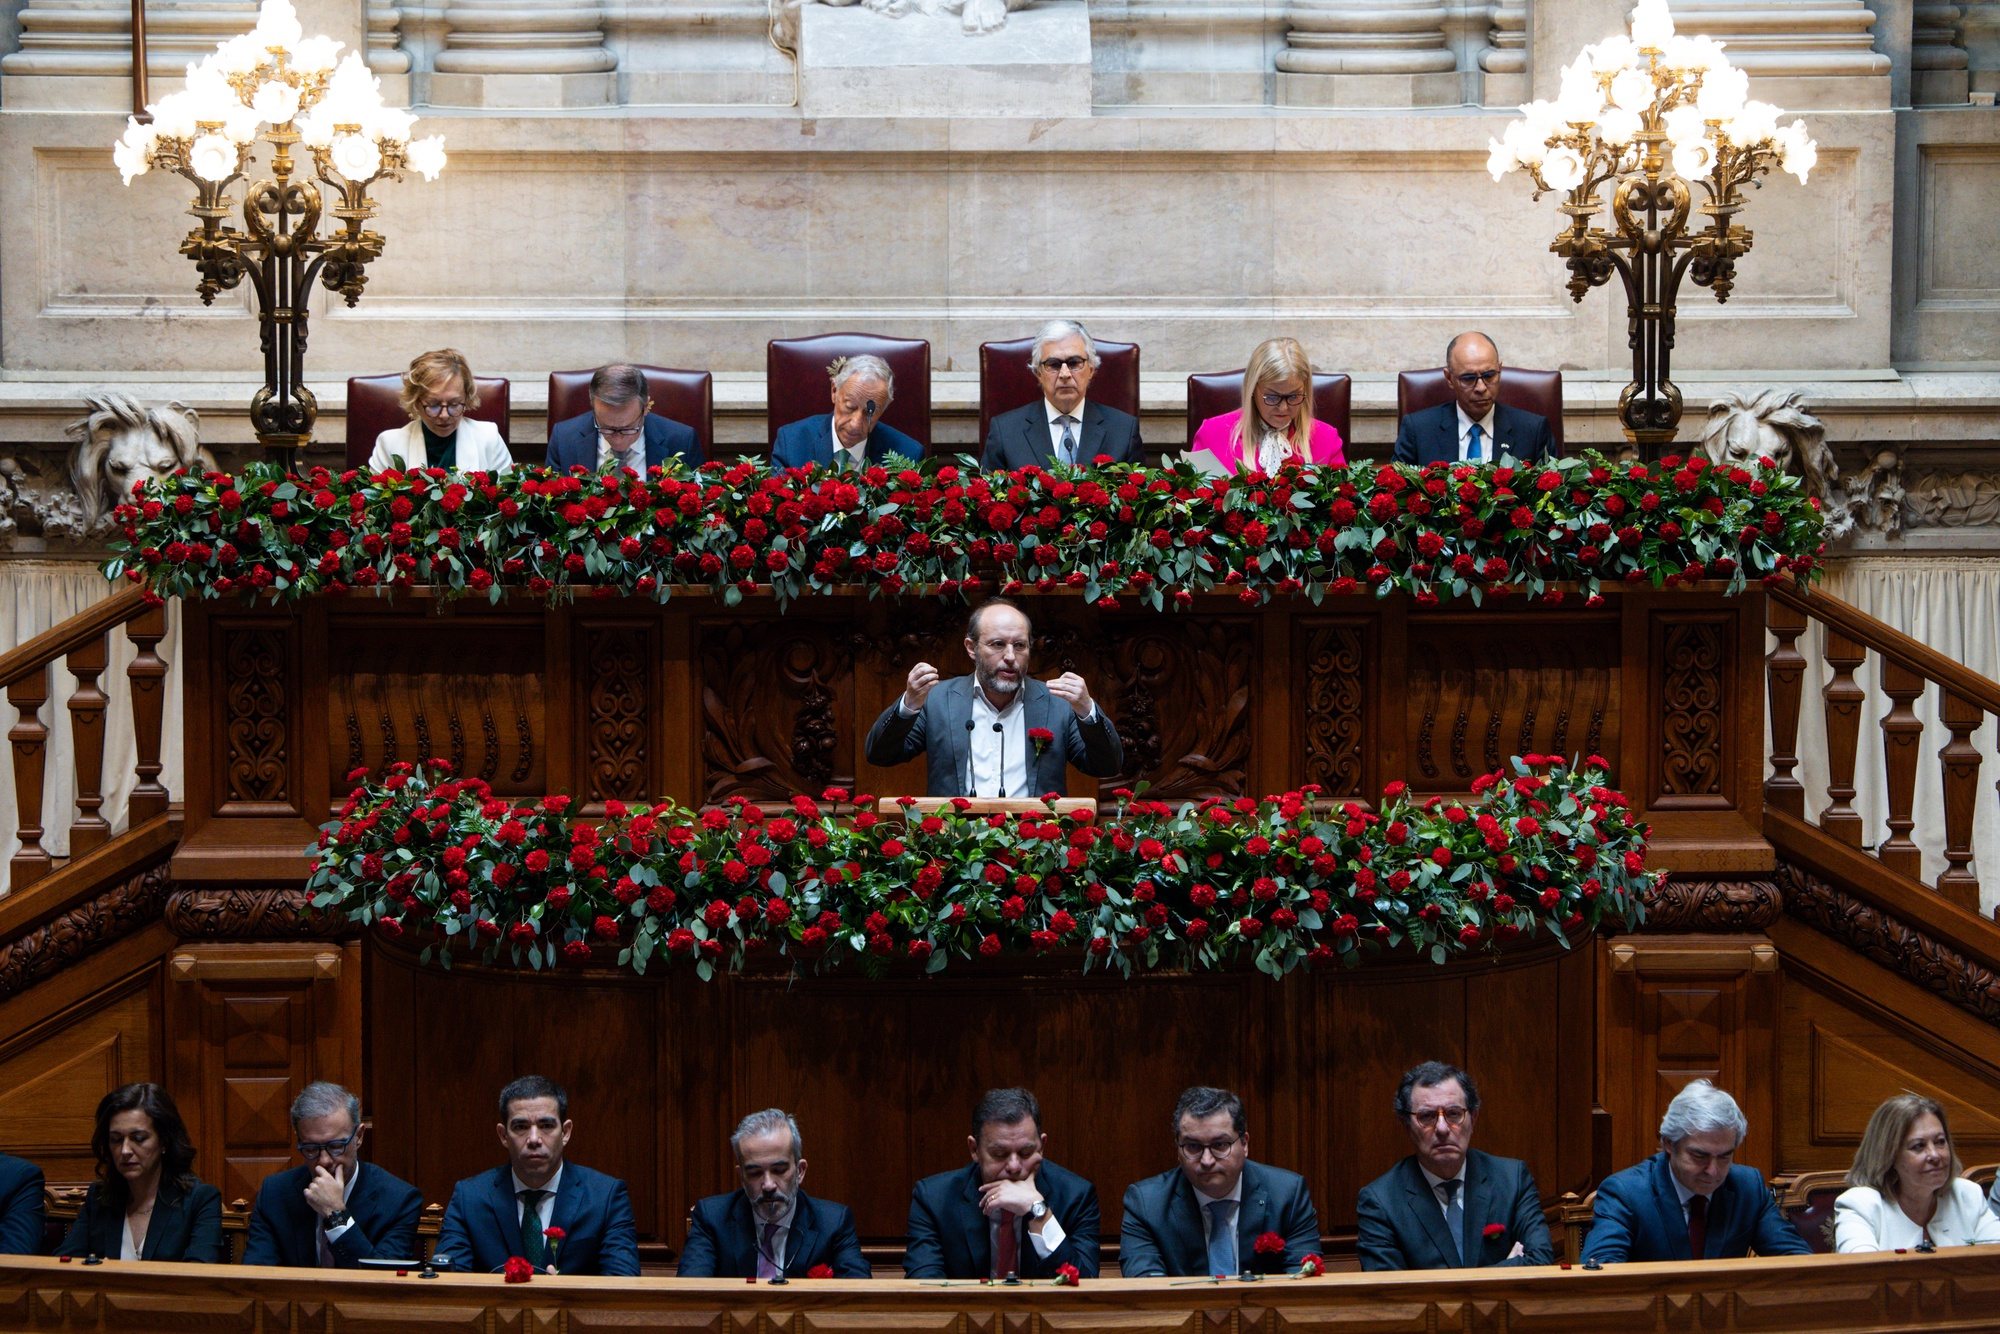 The leader of Livre (Free) Party, Rui Tavares, delivers a speech during the solemn comemorative session at the Portuguese parliament in Lisbon, Portugal, 25 April 2024. Portugal celebrates the 50th anniversary of the Carnation Revolution that ended the authoritarian regime of Estado Novo (New State) that ruled the country between 1926 to 1974. JOSE SENA GOULAO/LUSA